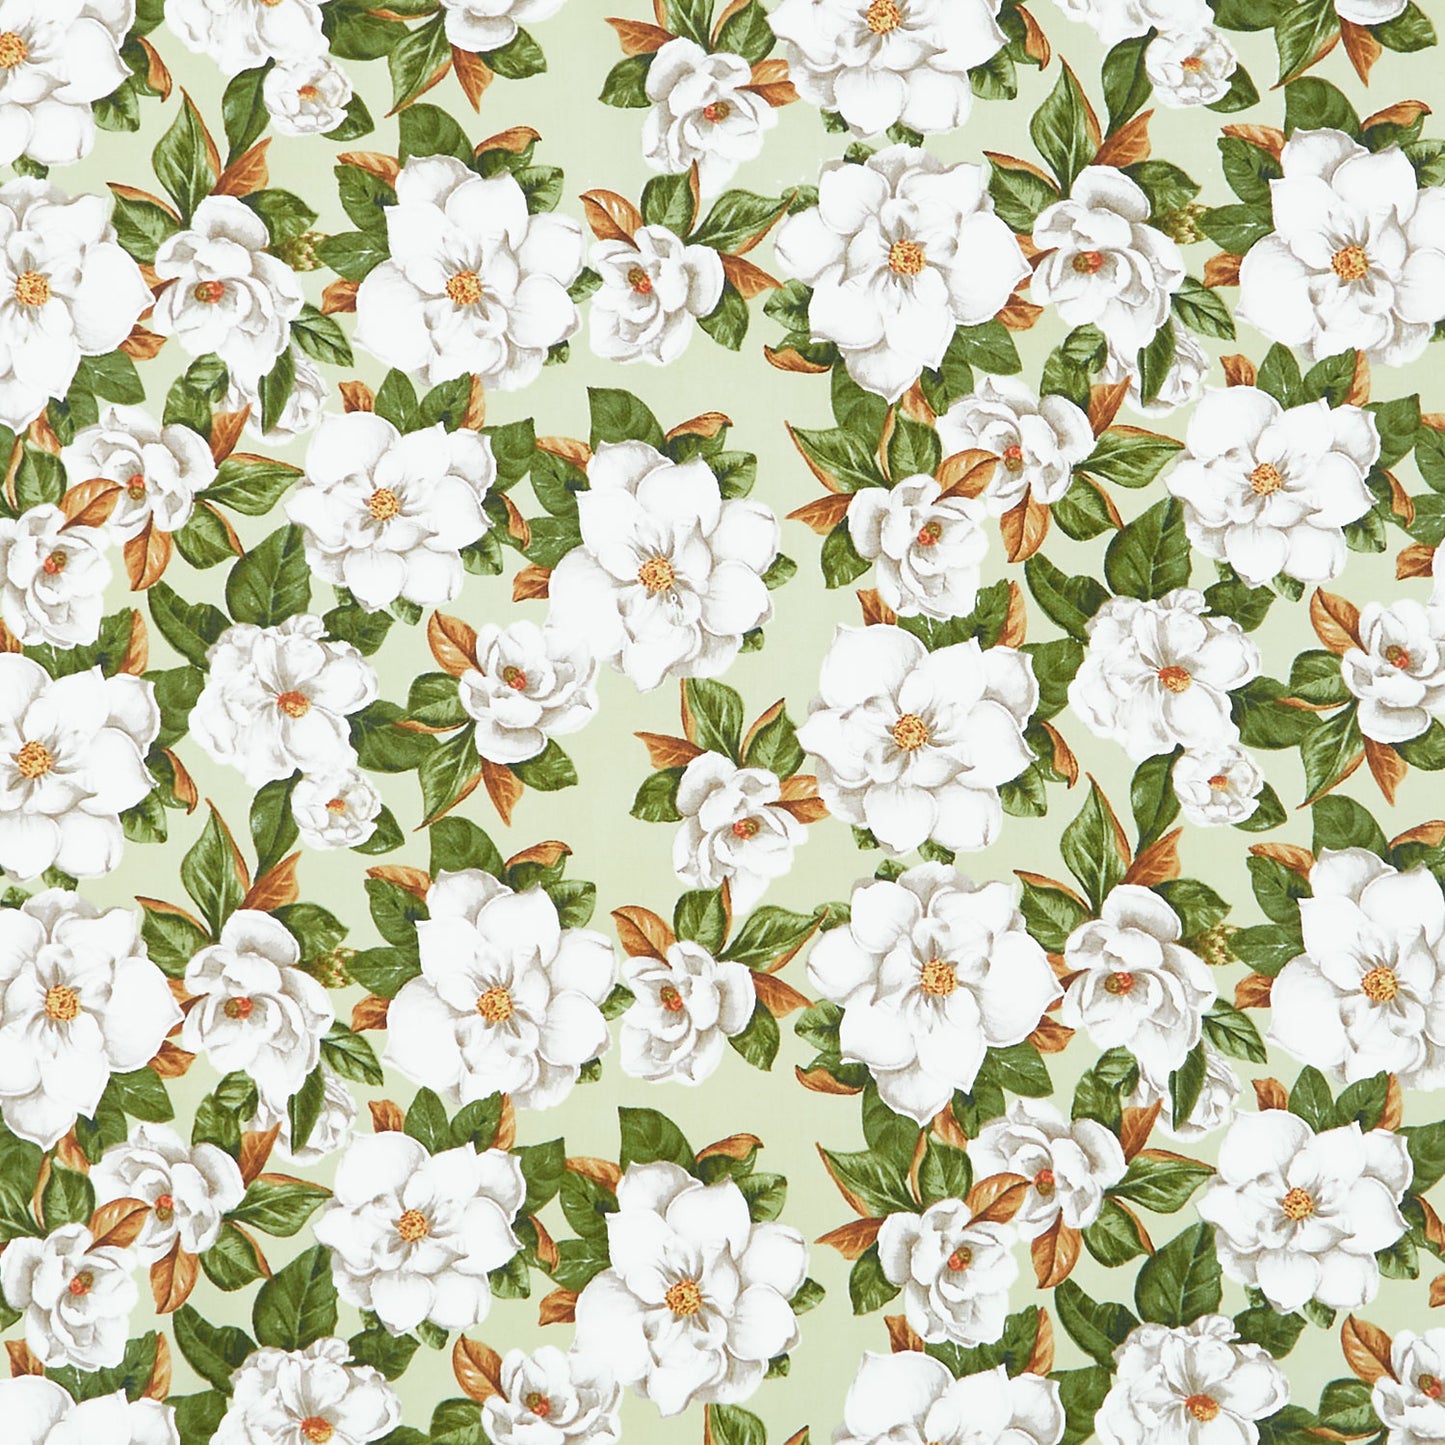 Monthly Placemat Coordinate - Magnolias Fern Yardage Primary Image